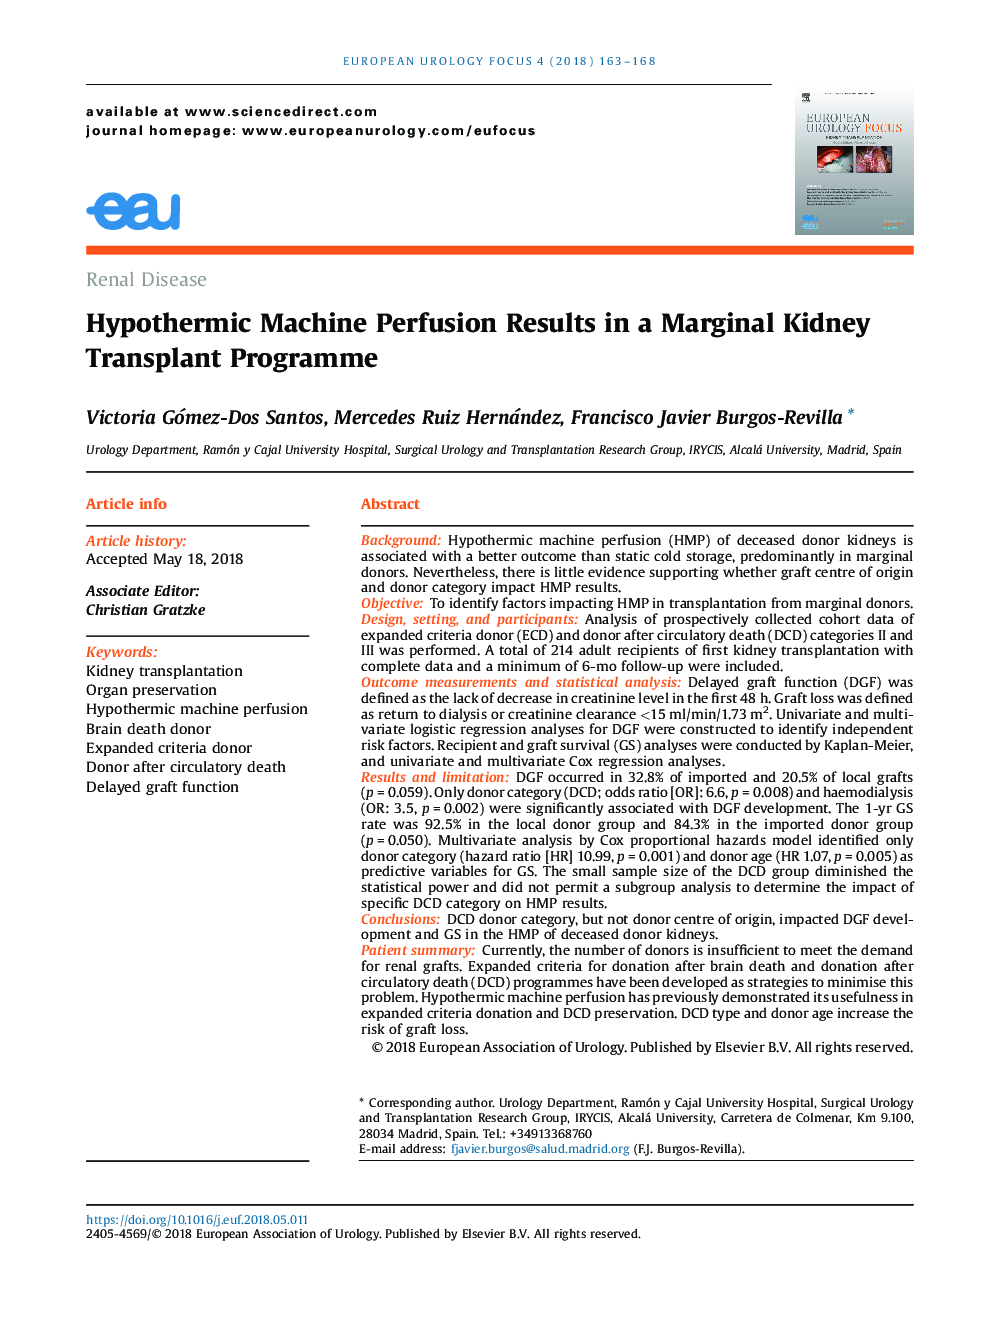 Hypothermic Machine Perfusion Results in a Marginal Kidney Transplant Programme